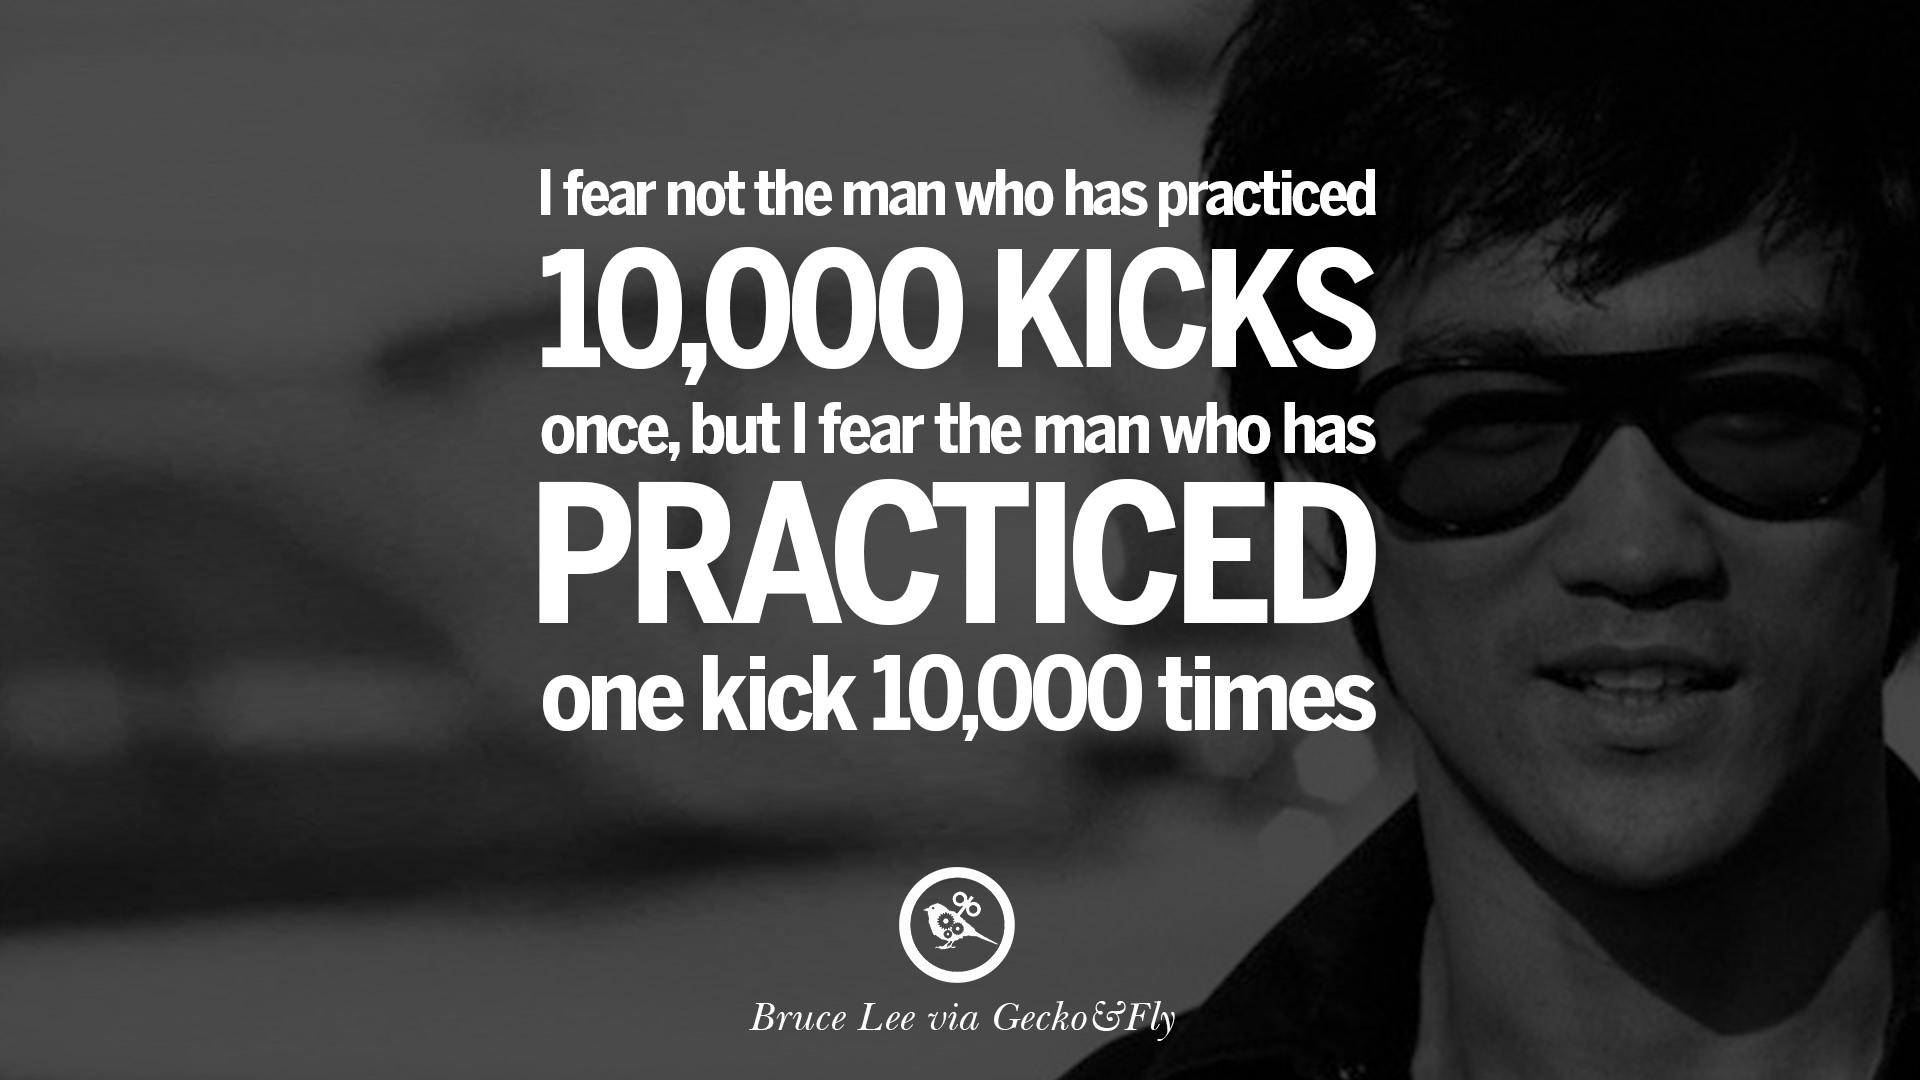 bruce lee quotes I fear not the man who has practiced 10,000 kicks once